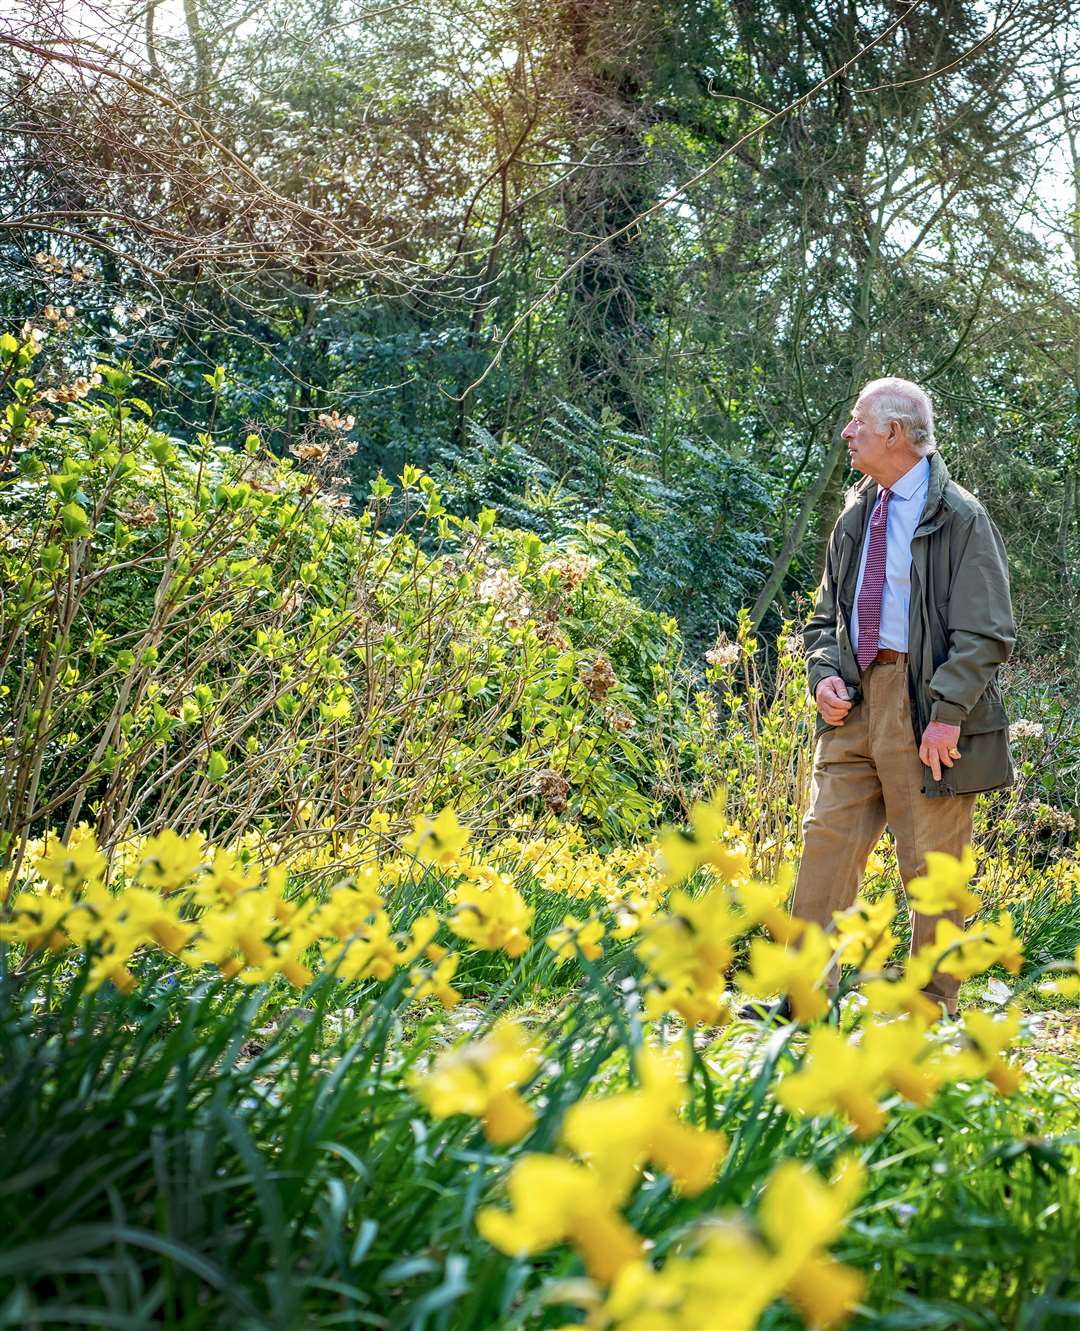 Charles in the gardens of his home Highgrove (Leanne Punshon/The Prince’s Foundation/PA)